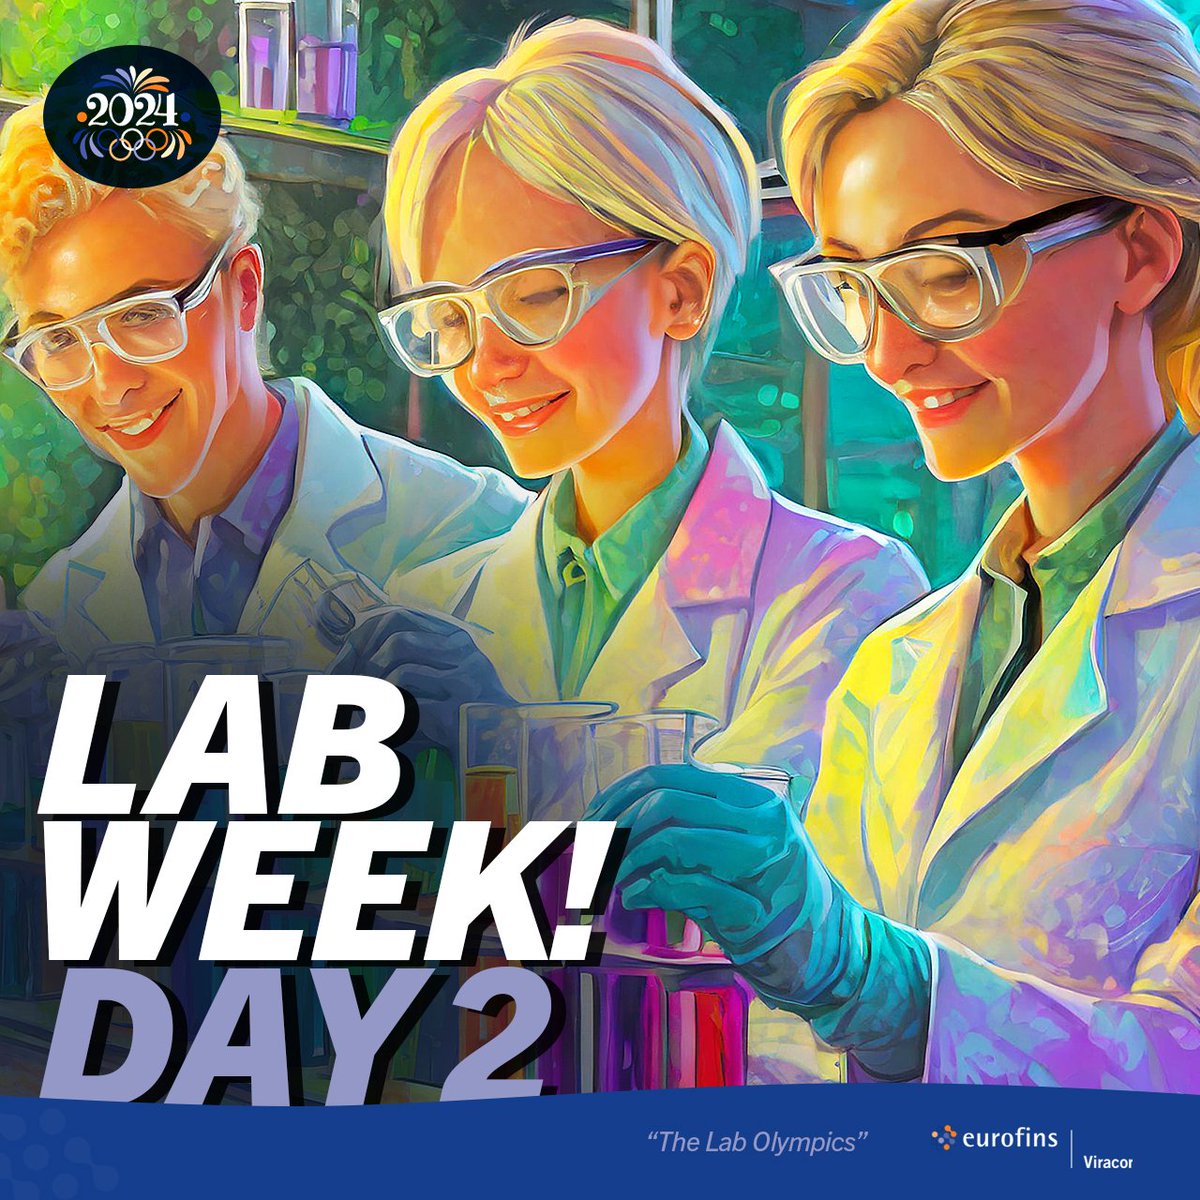 It's day 2 of #LabWeek! 🤔 DID YOU KNOW? 👇 In 1983, Kary Mullis invented the polymerase chain reaction (PCR), a technique that revolutionized DNA diagnostics, forensic science, and molecular biology. Our ExPeCT™ anti-CD19 CAR T assay is just one way we utilize this…